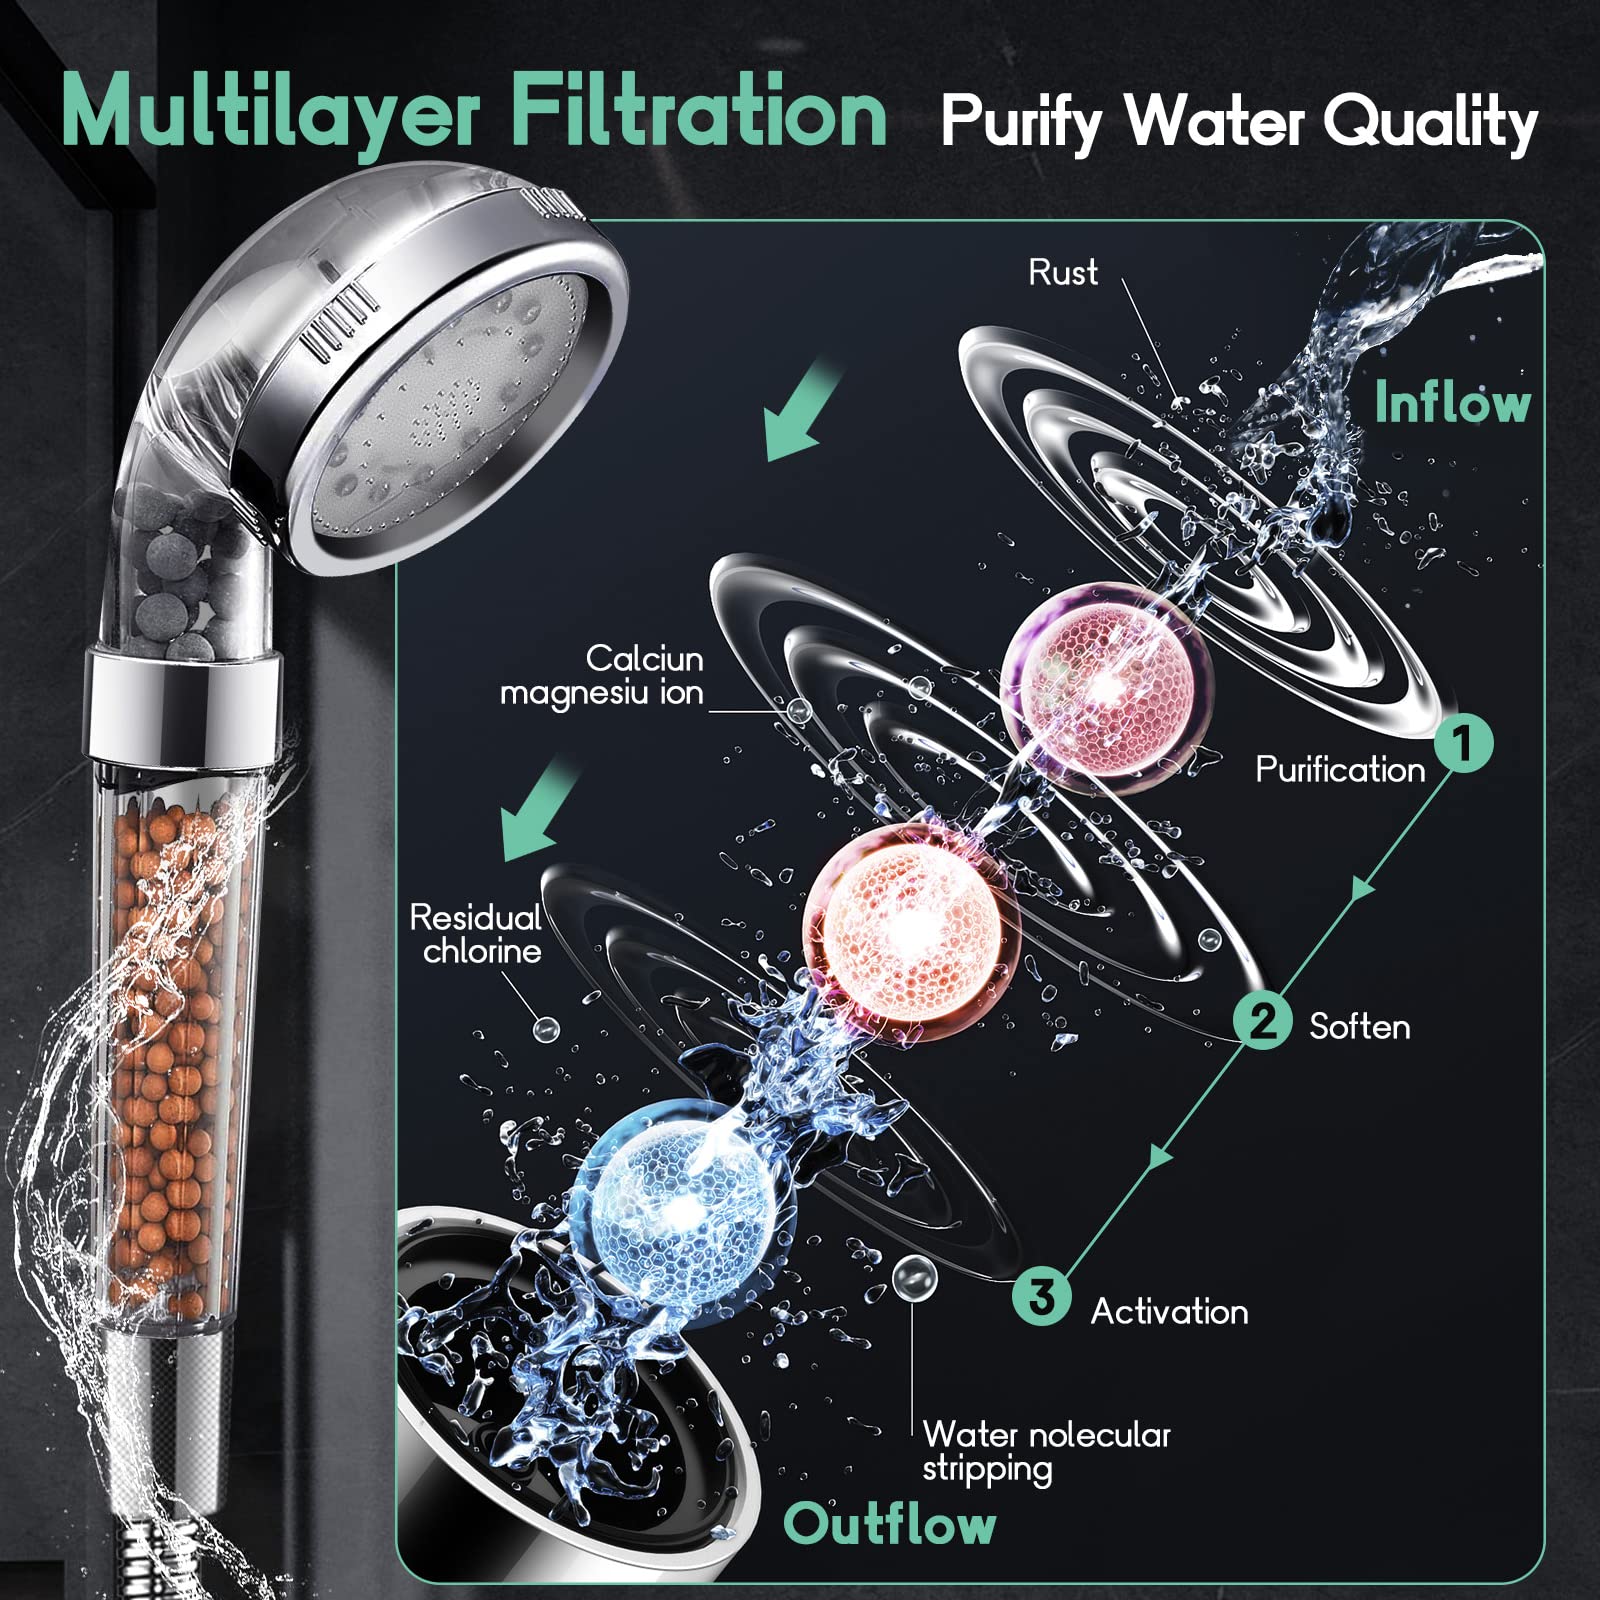 Filtered Shower Head with LED, 10'' Rain Shower Head with Upgraded 12'' Curved Adjustable Extension Arm, High Pressure Color Changing LED Handheld Shower Head with Filter Beads for Hard Water, Chrome